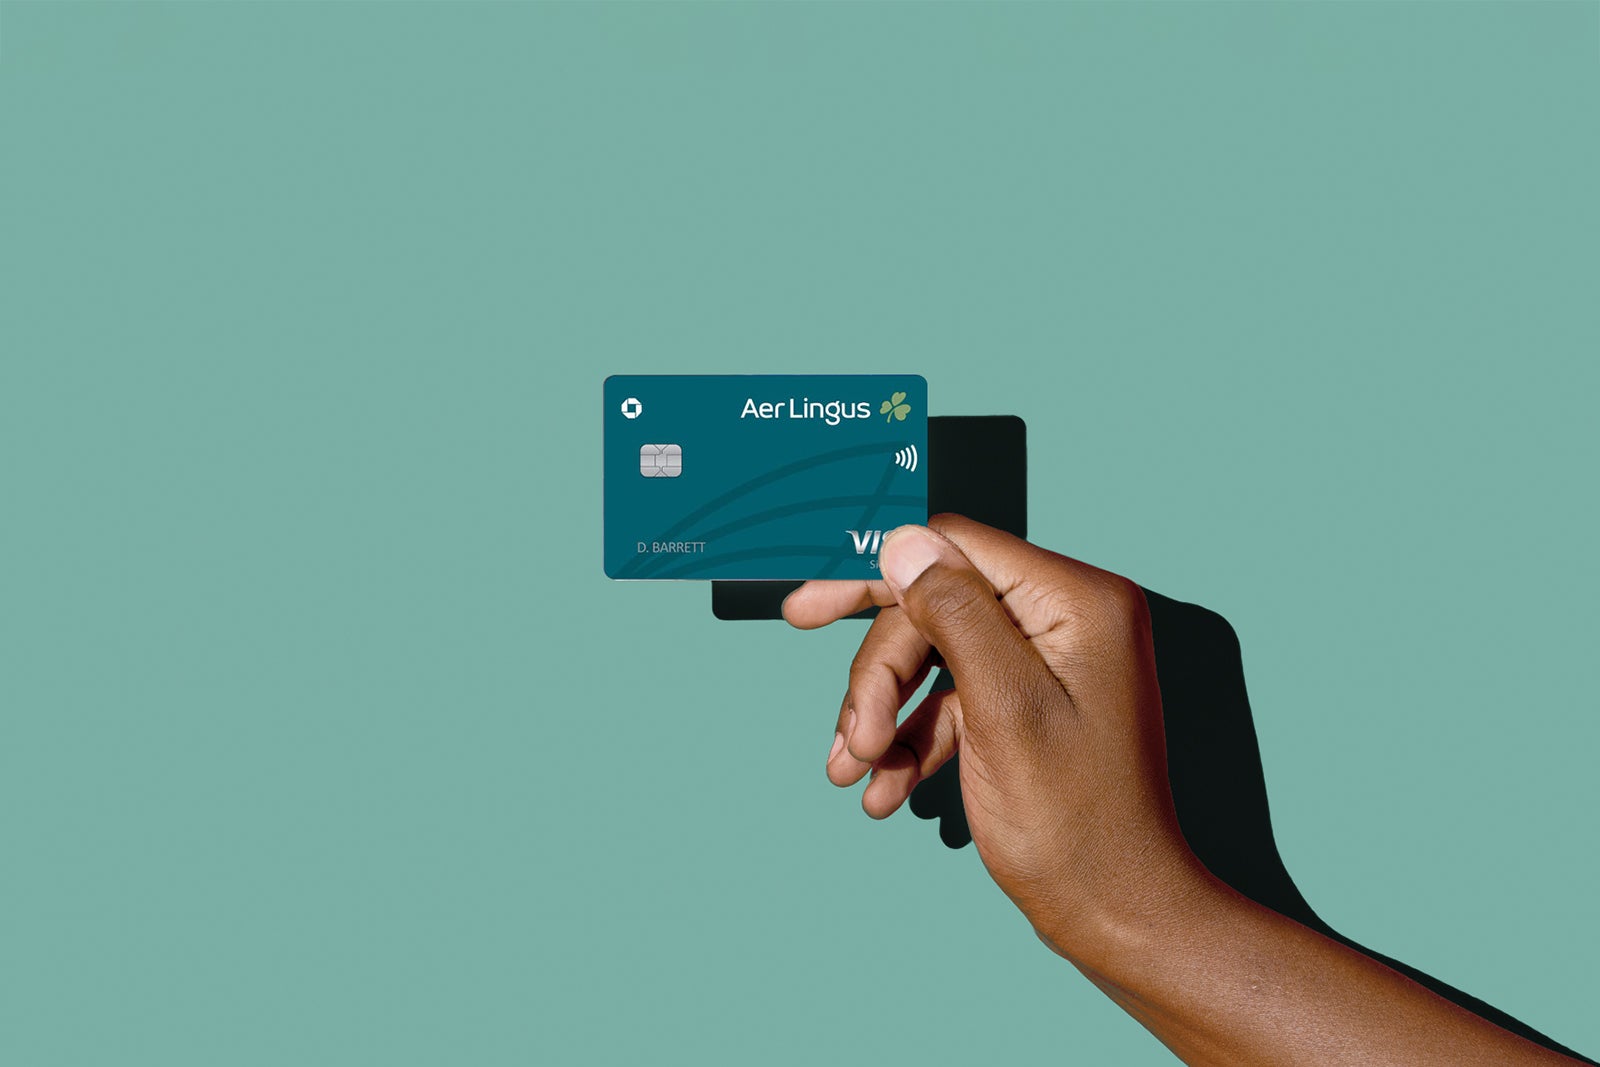 You are currently viewing Aer Lingus Visa Signature credit card review: A decent way to earn Avios